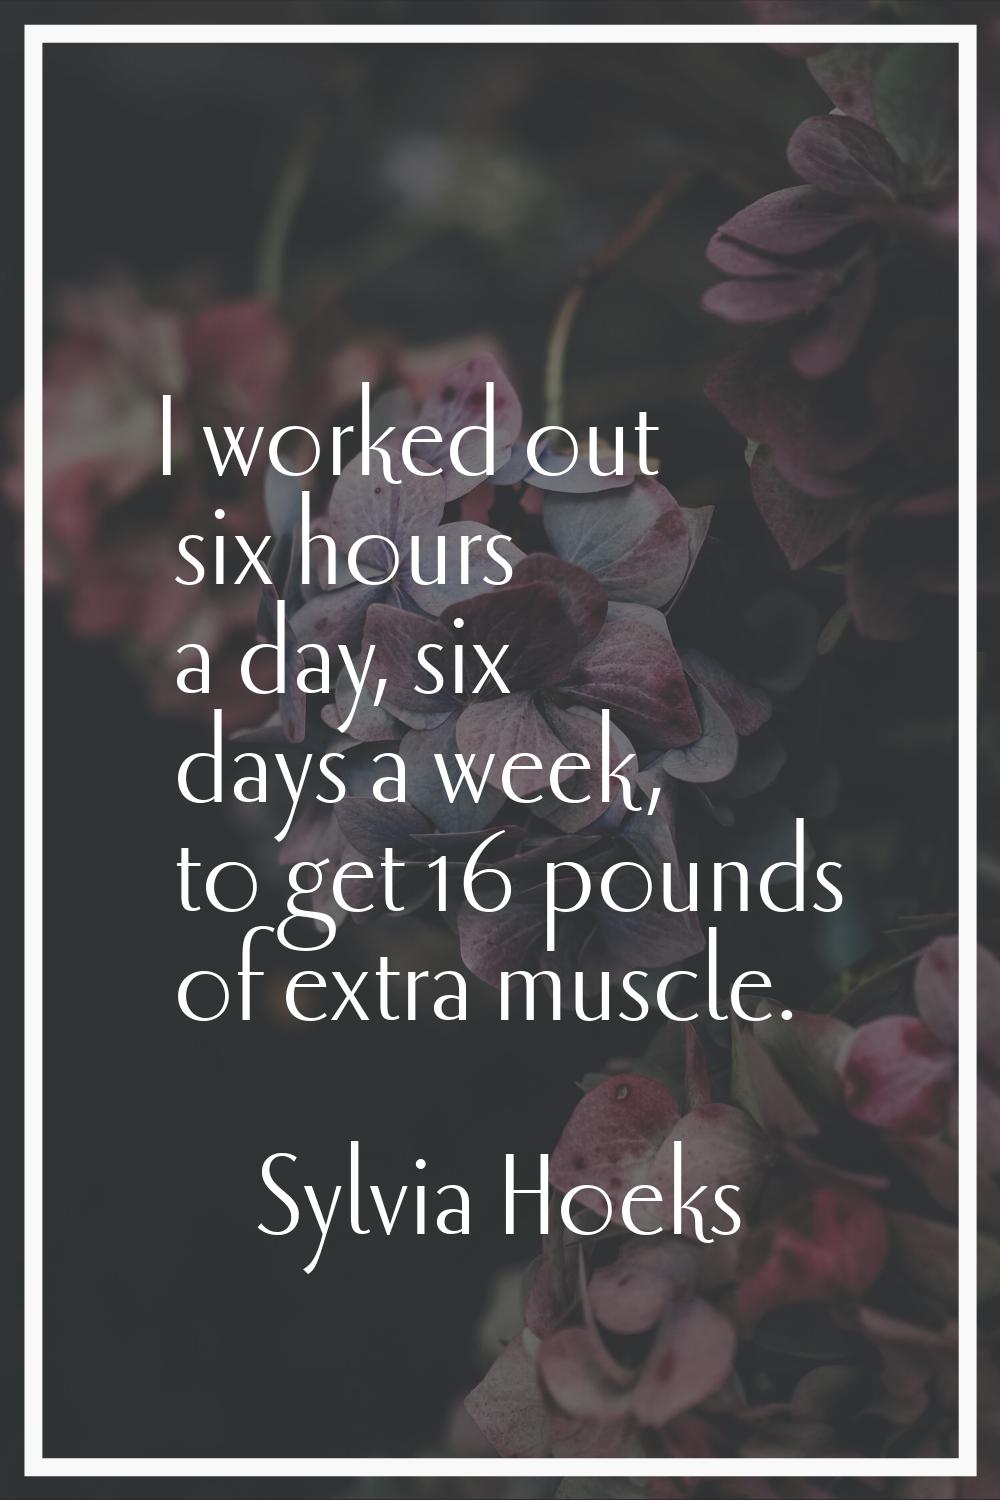 I worked out six hours a day, six days a week, to get 16 pounds of extra muscle.